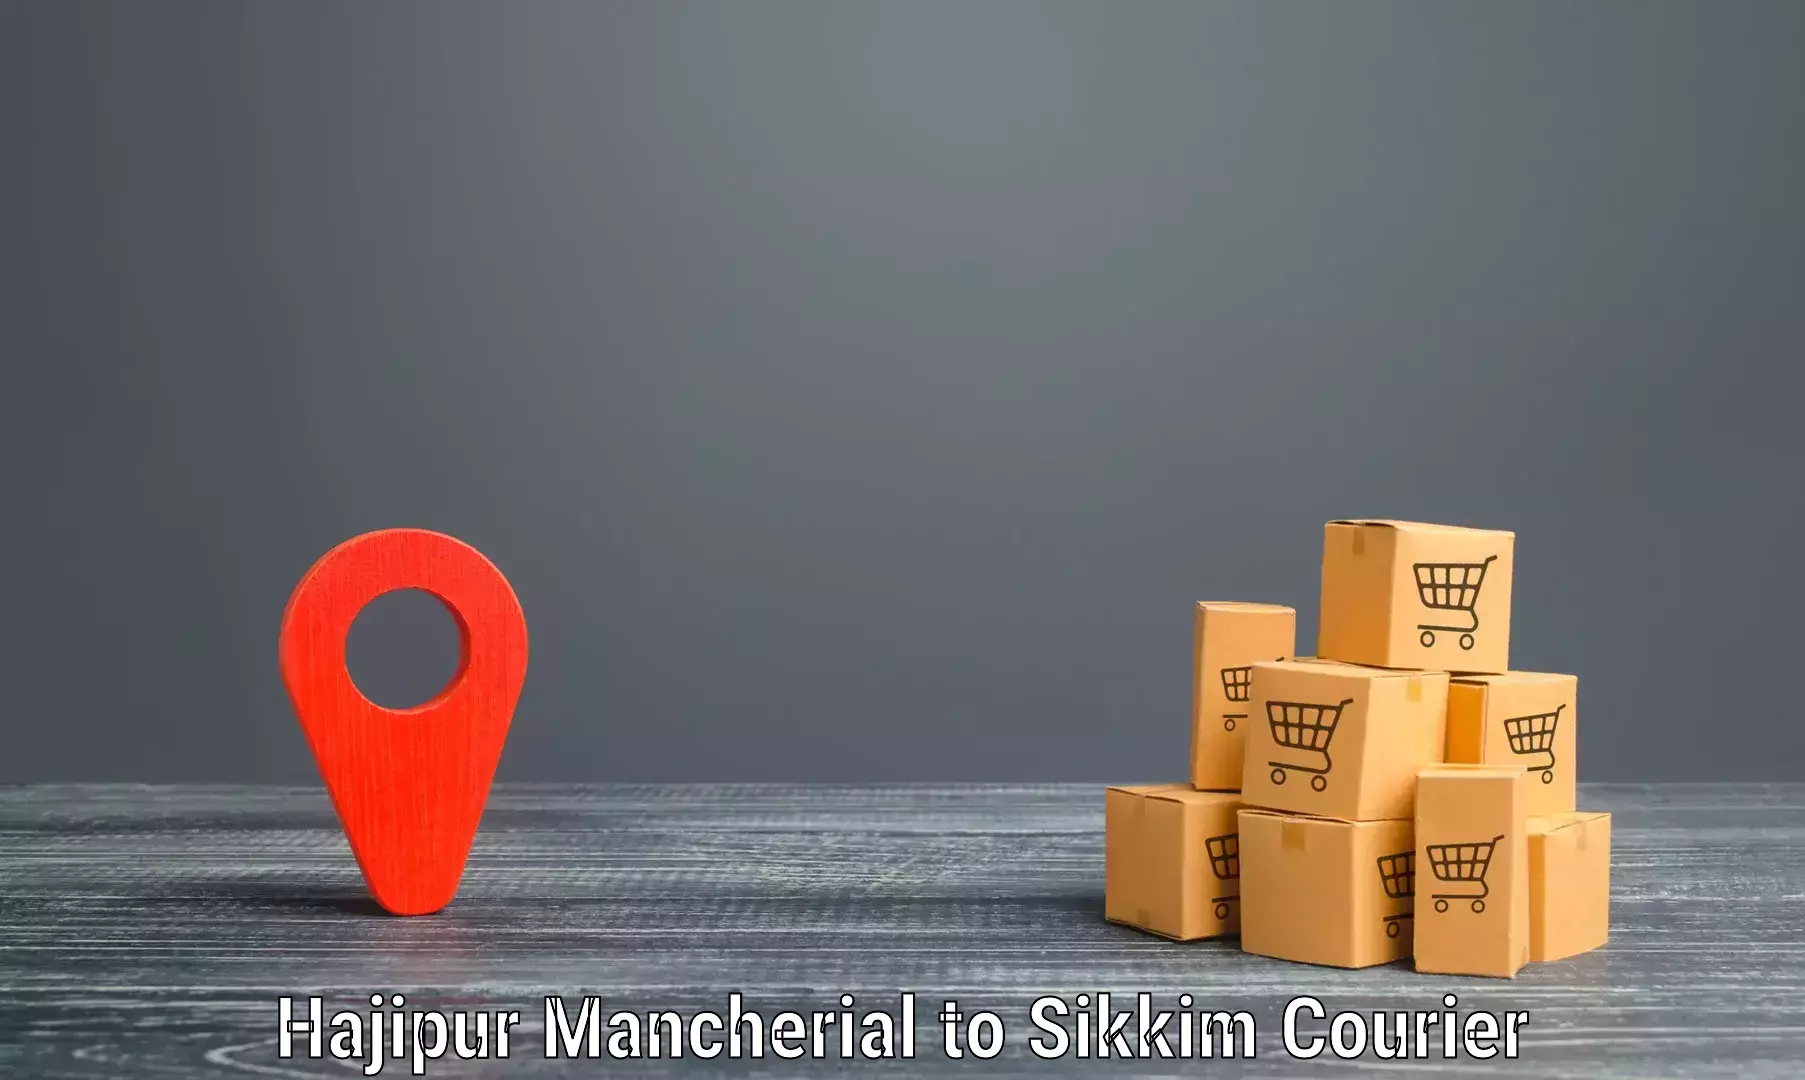 Automated parcel services Hajipur Mancherial to Geyzing